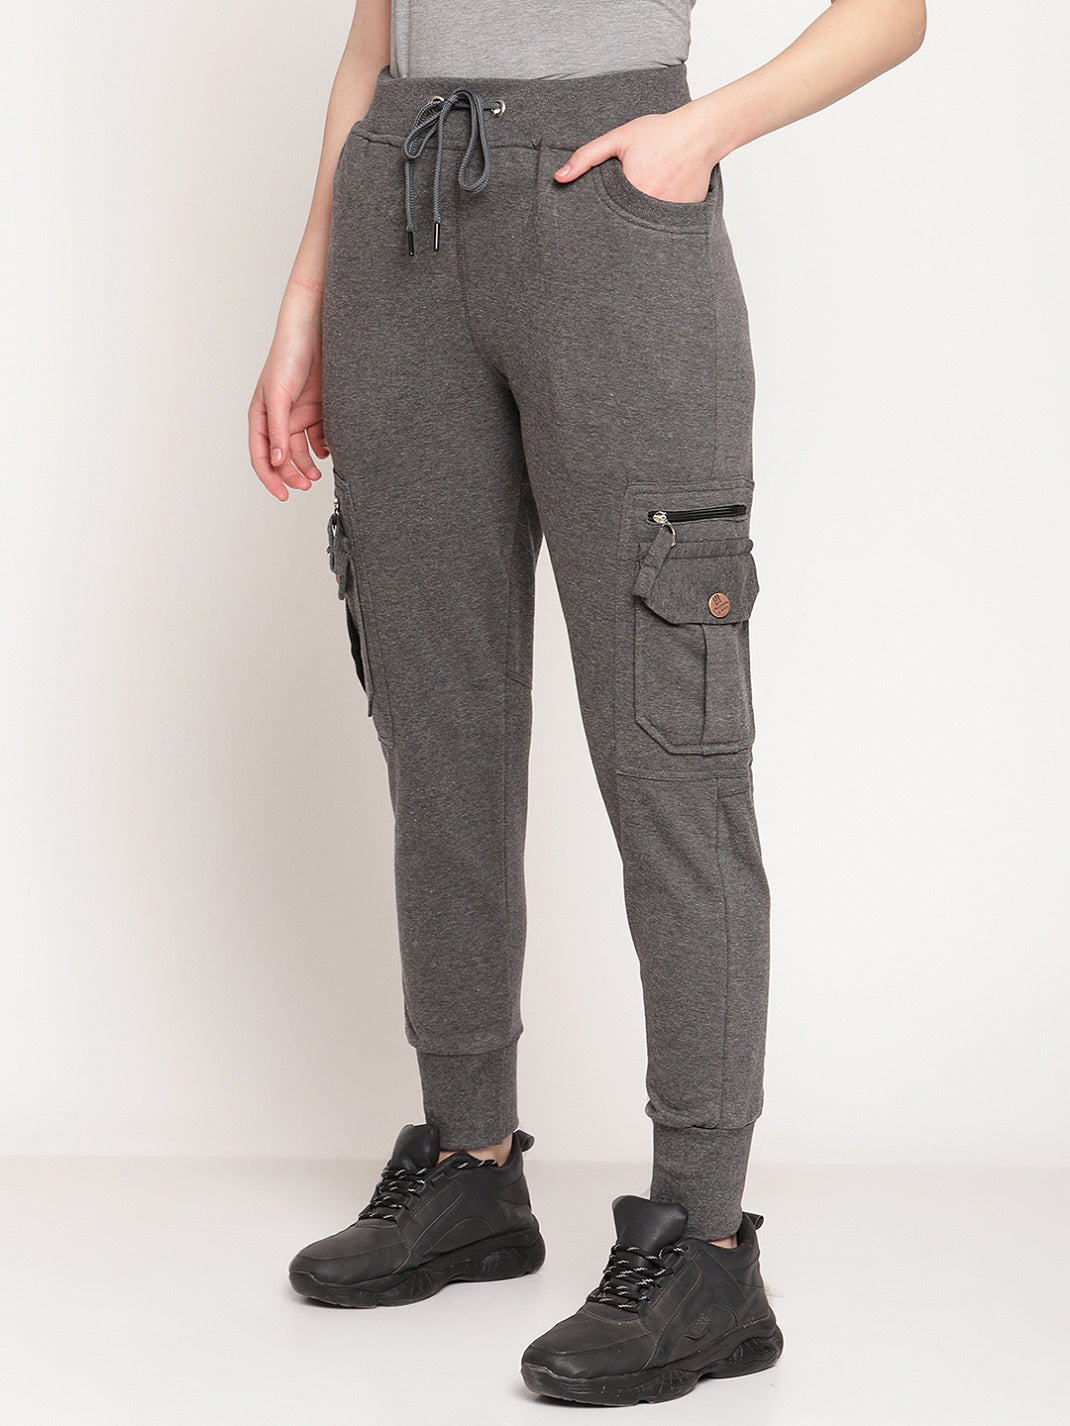 Women's Cotton Slim Fit Cargo Joggers Track Pants with 4 Zippered Pock